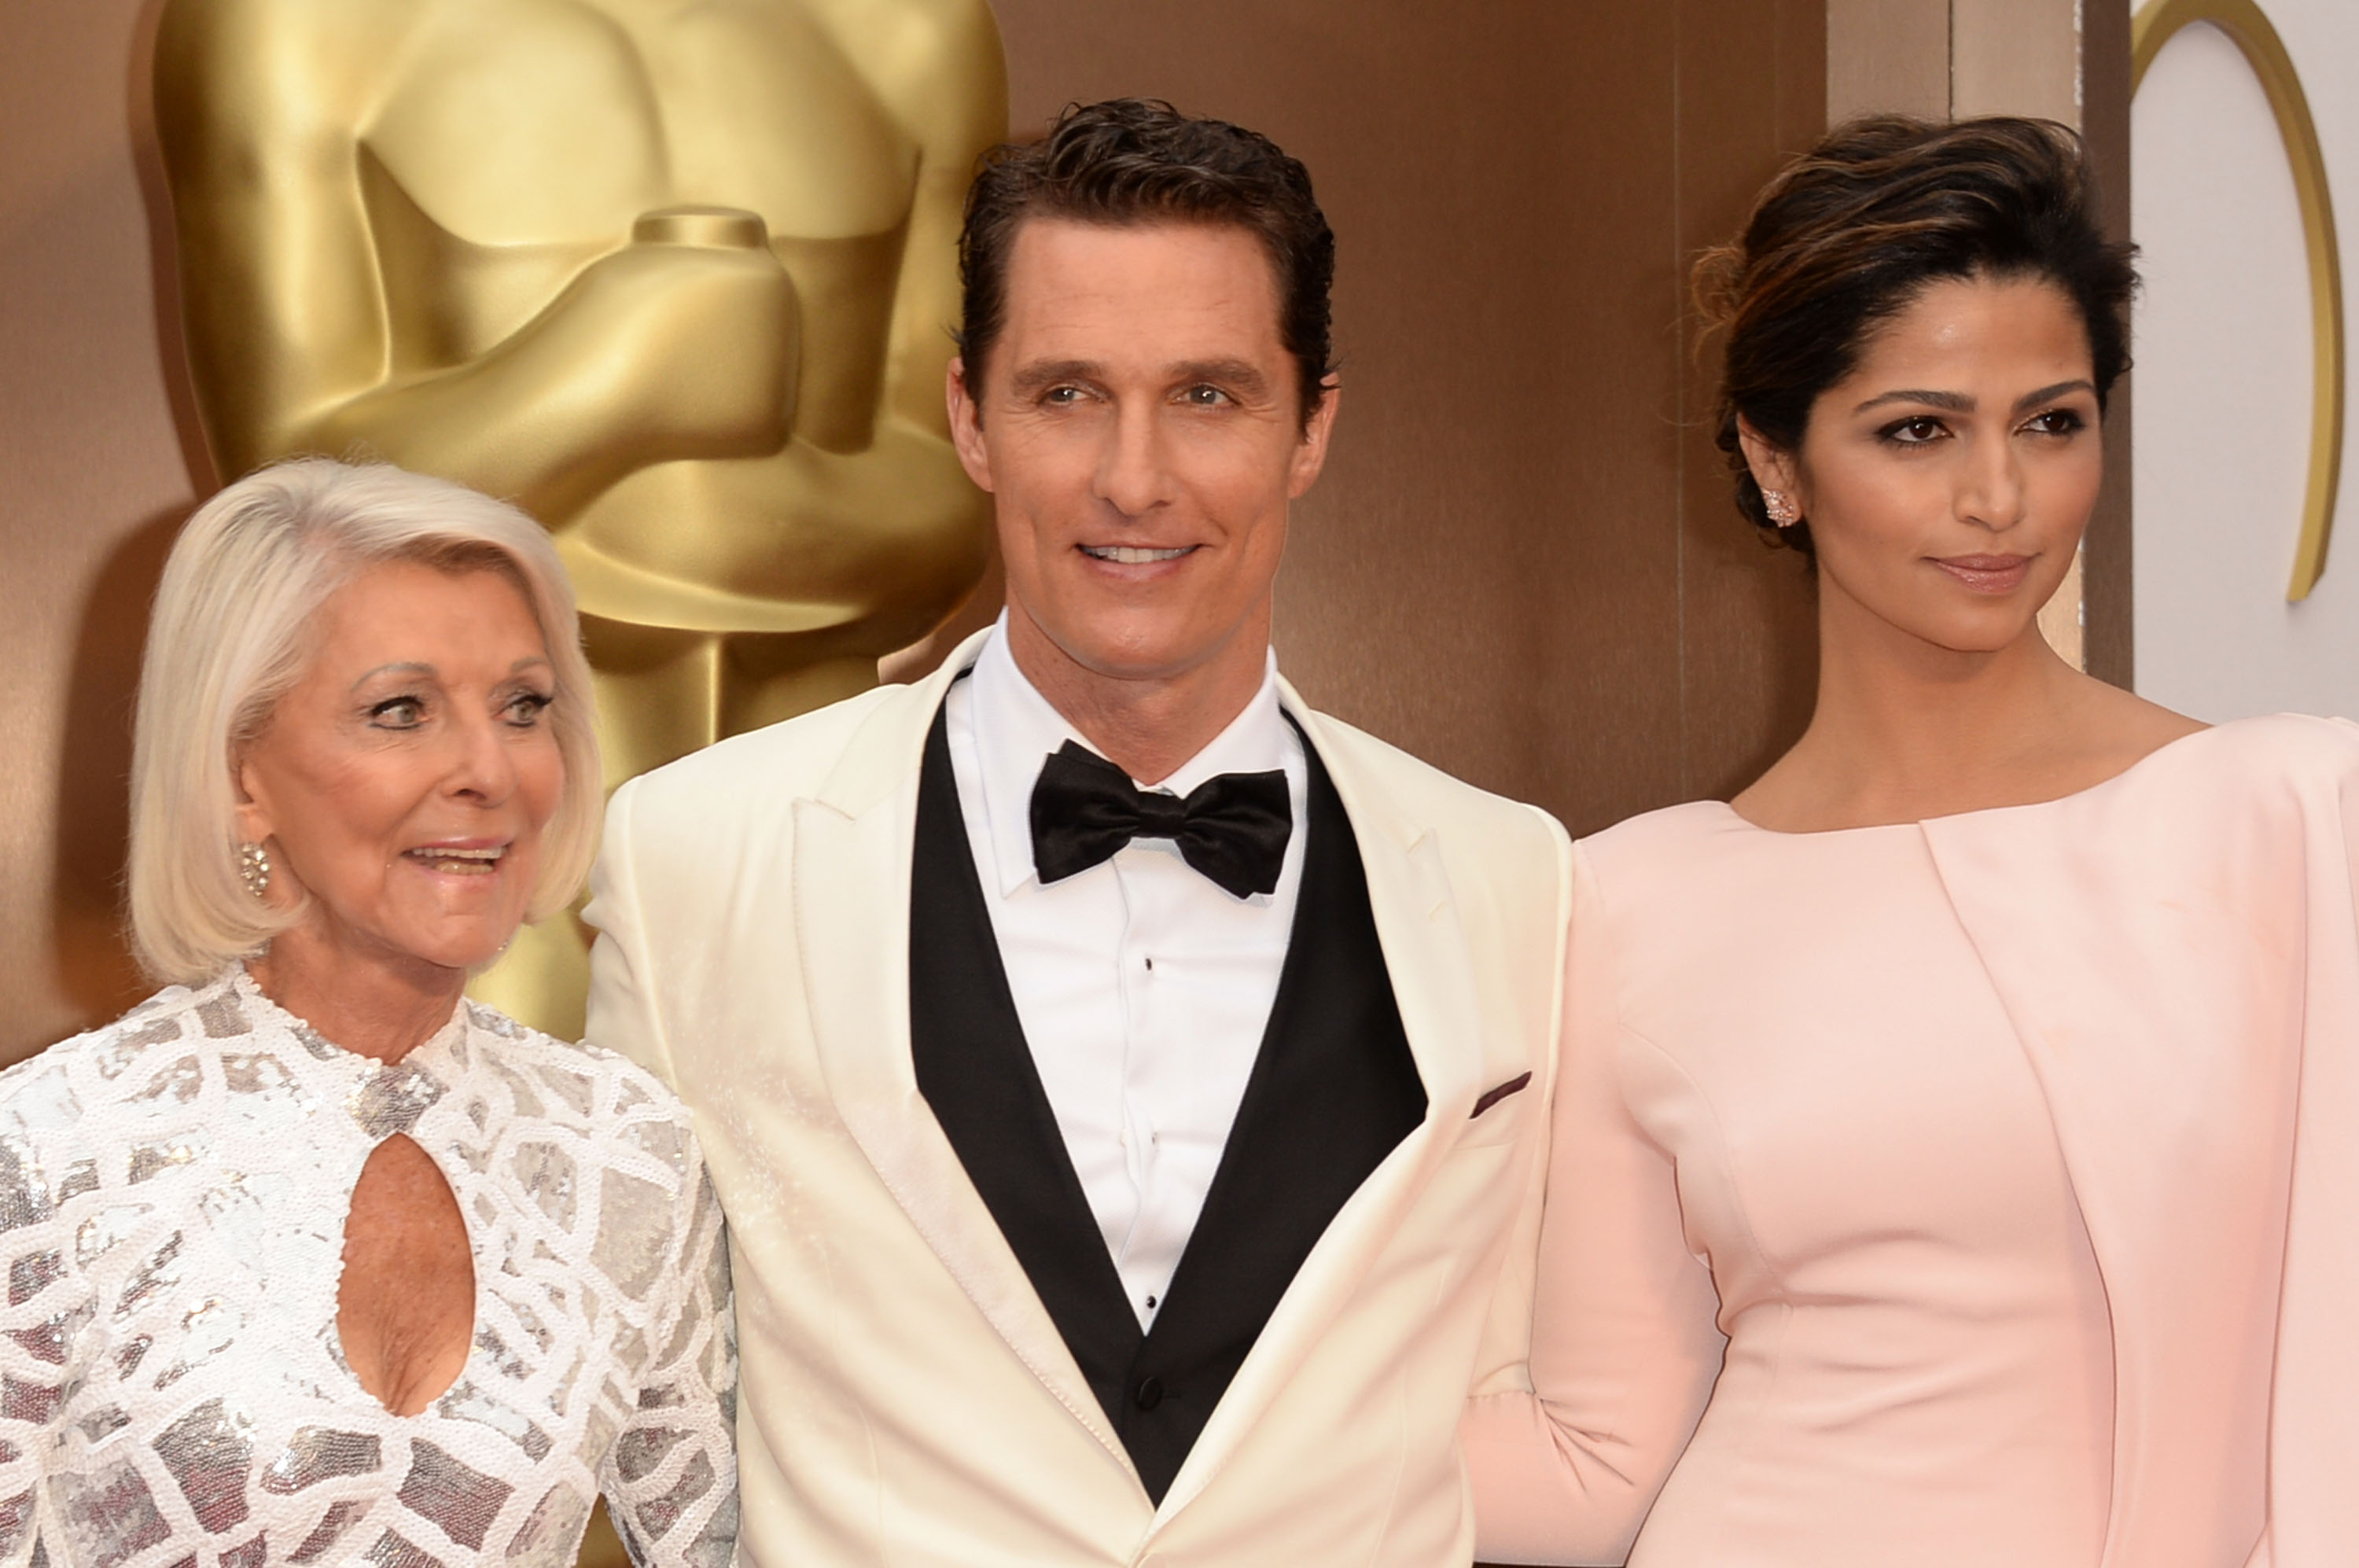 Kay McConaughey, Matthew McConaughey, and Camila Alves McConaughey at the Oscars on March 2, 2014, in Hollywood, California | Source: Getty Images